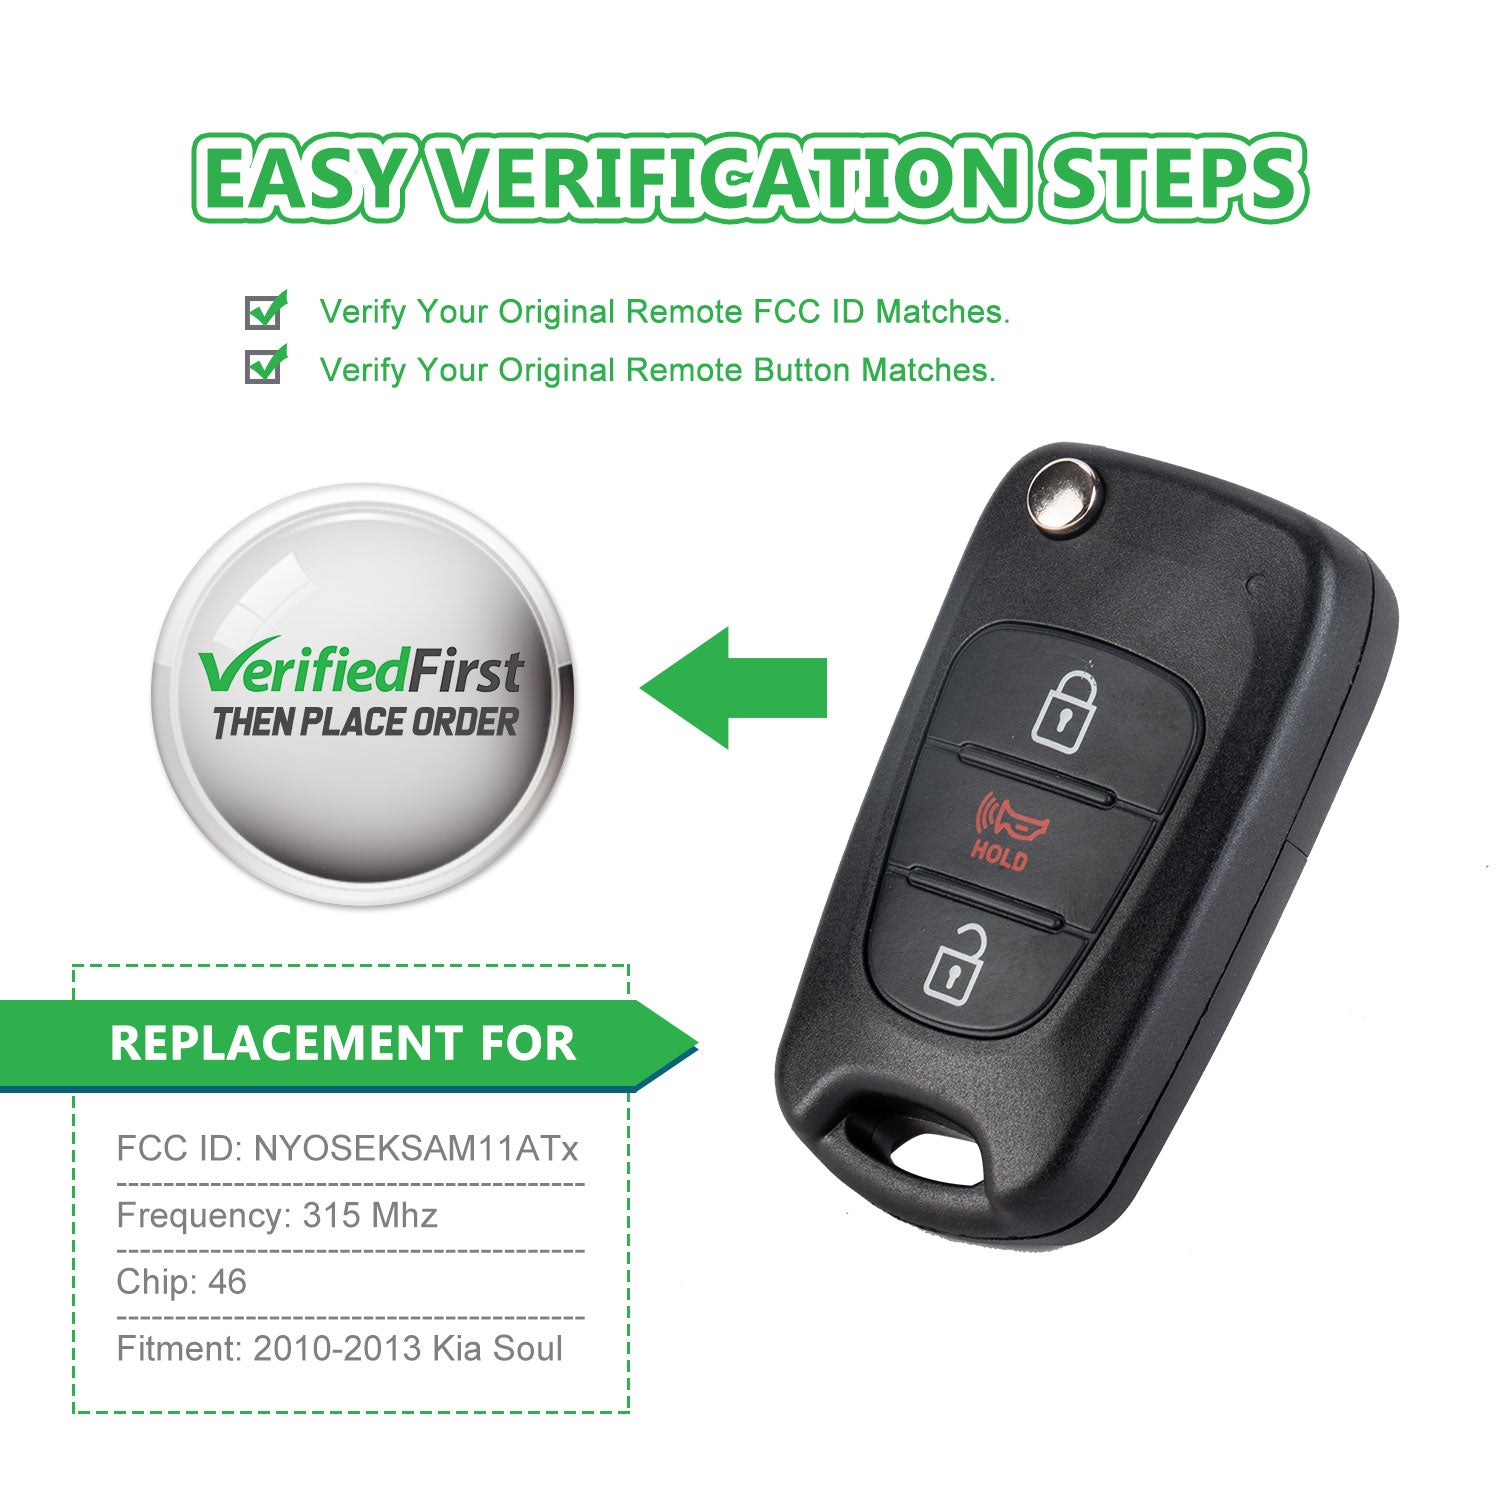 Lots of 5 Extra-Partss Remote Car Key Fob Replacement for Kia NYOSEKSAM11ATX TQ8-RKE-3F02 fits 2010 2011 2012 2013 Soul